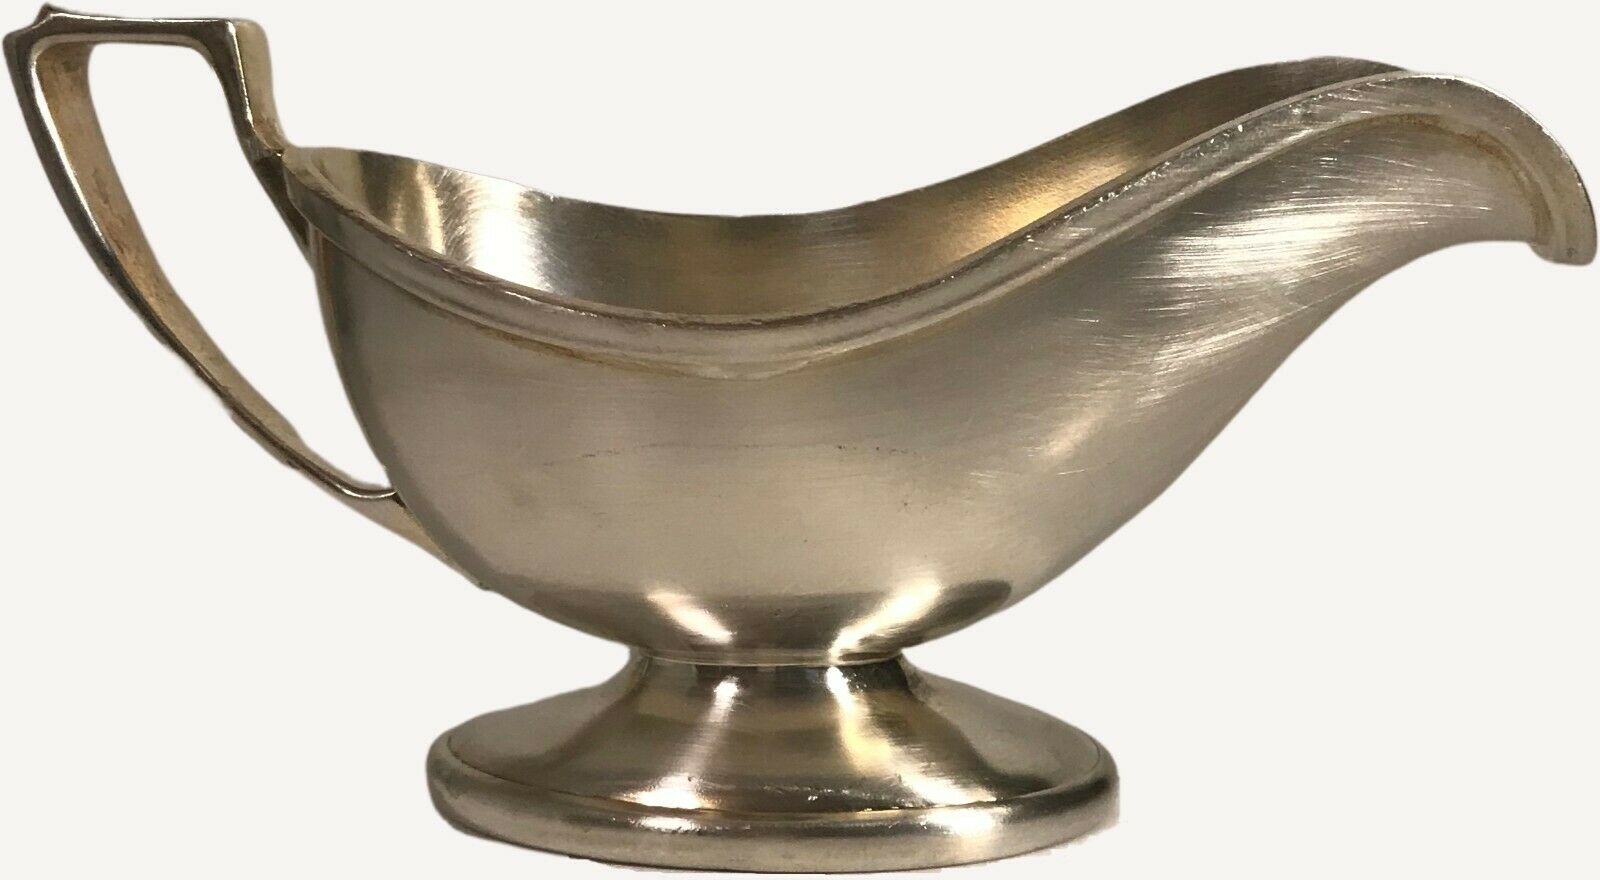 Antique Silver Plated Gravy Boat By Old Libbey (canada)